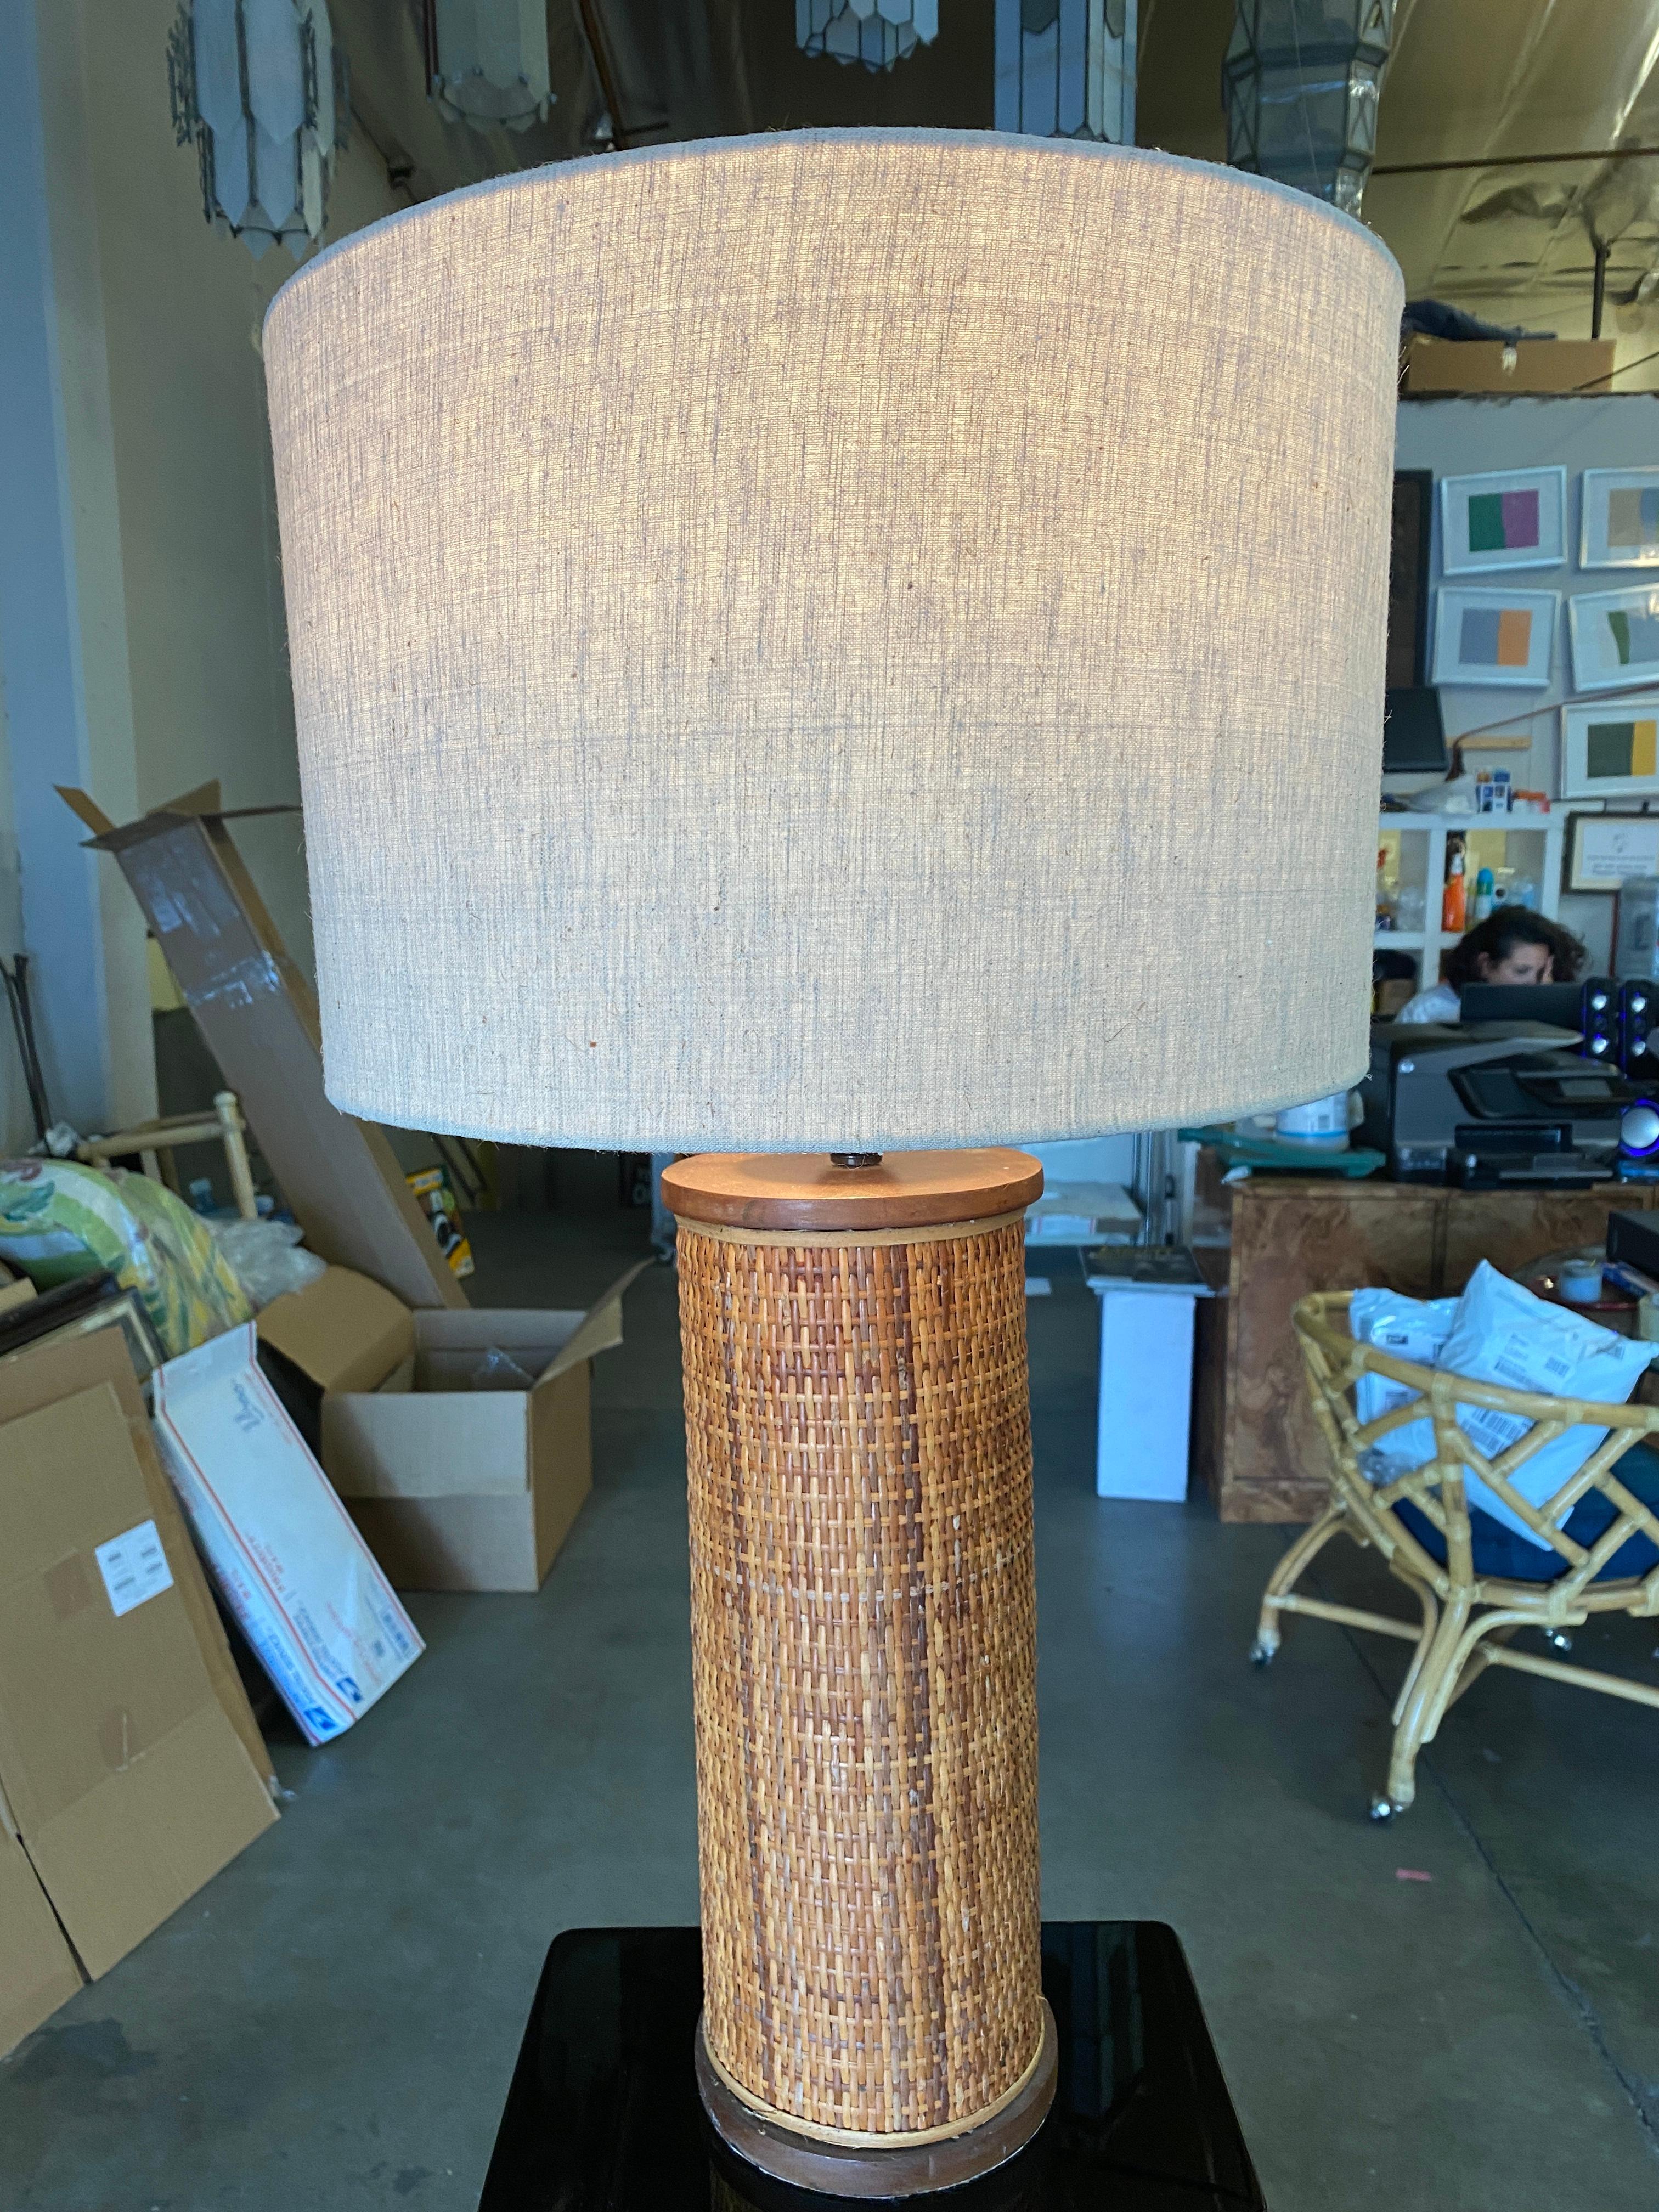 Modernist Circa 1980 lamp featuring a Dark stained mahogany base and top plate wrapped in decorative strung woven wicker grass-mat side. The lamp comes with its original Fabric Shade.

Lamp: 16